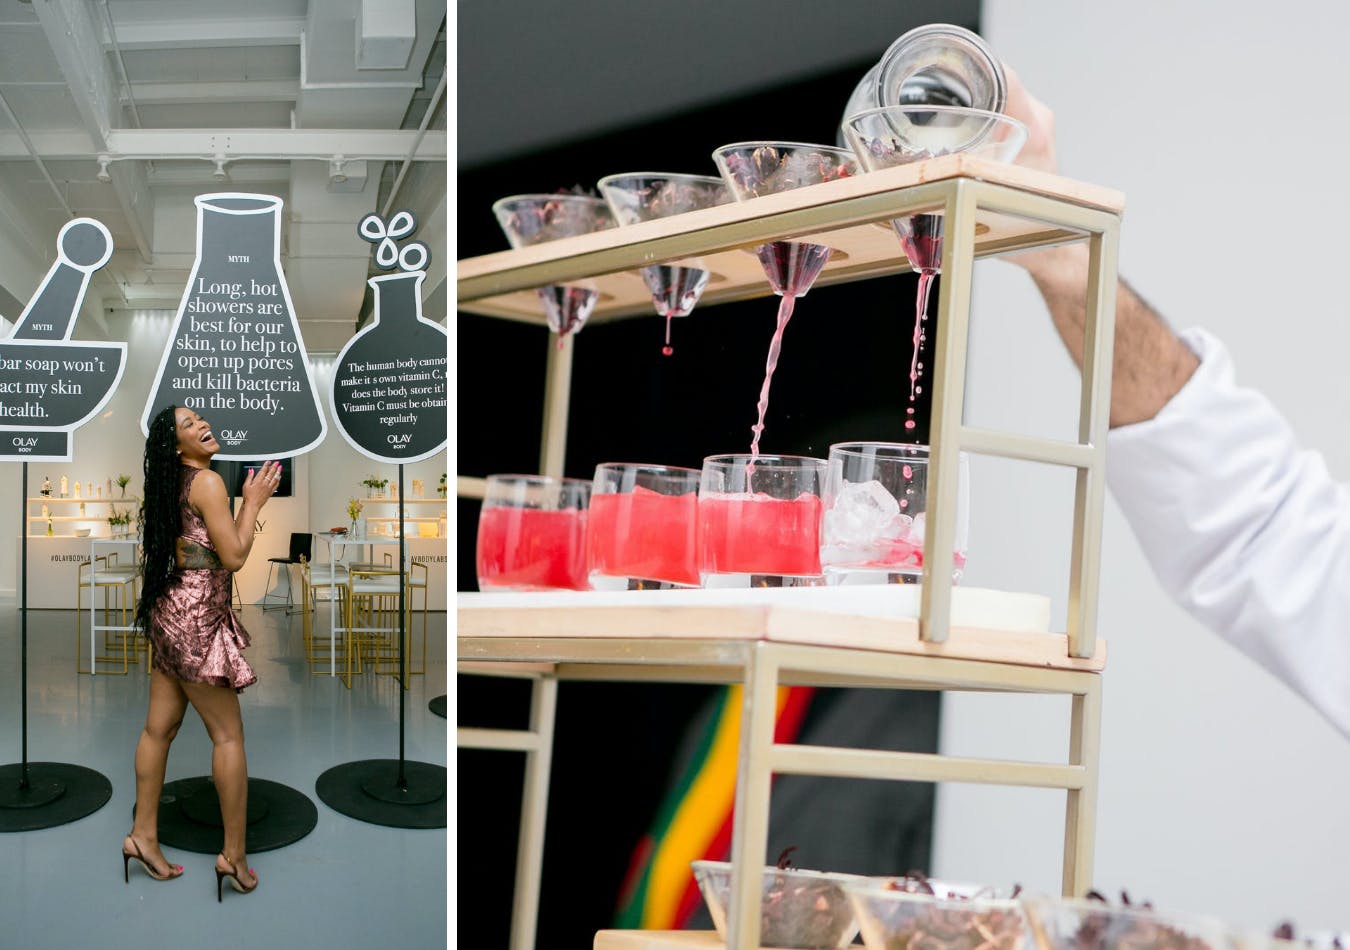 Olay Body Labs product launch with lab-like cocktail installation and lab equipment signage | PartySlate